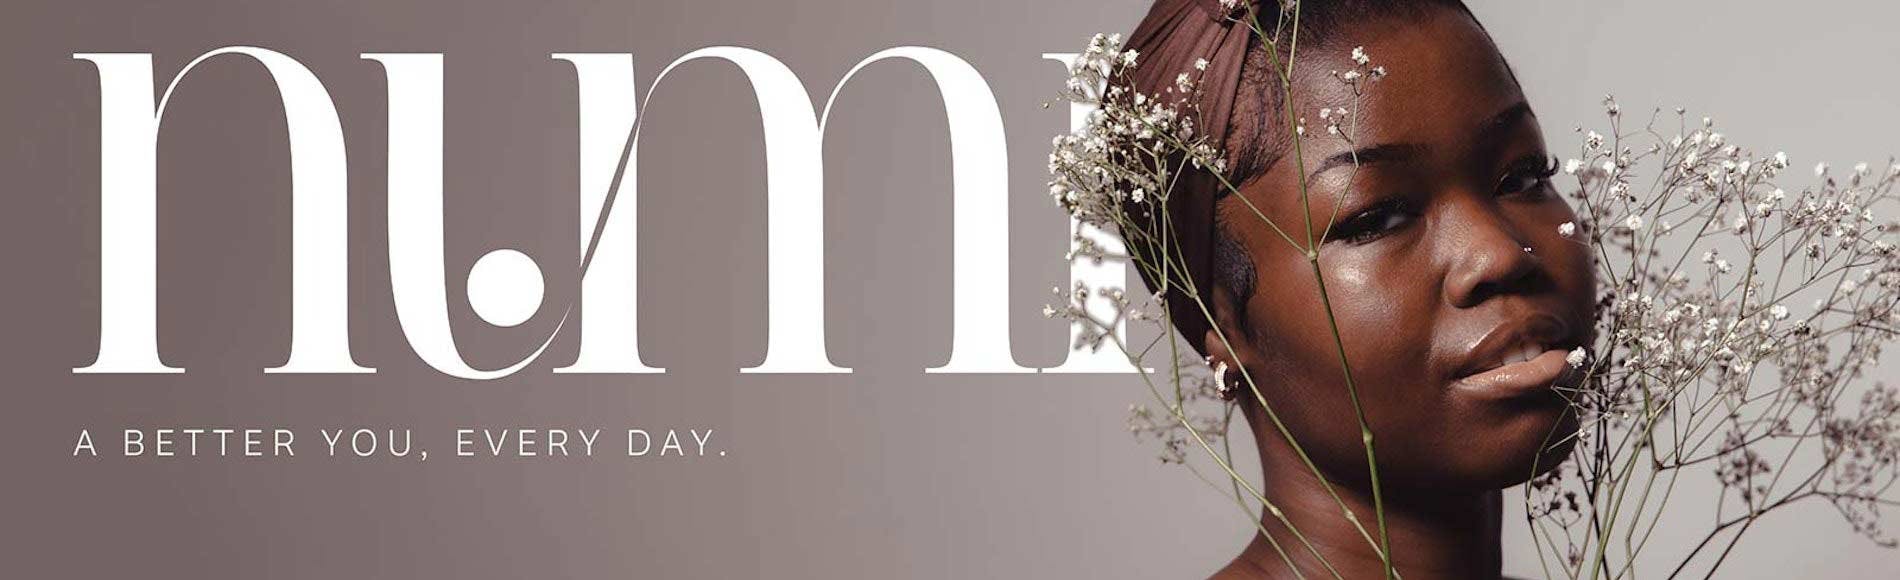 Graphic Design student work - advert for Numi - A better You, Every Day showing woman looking relaxed with blossoms